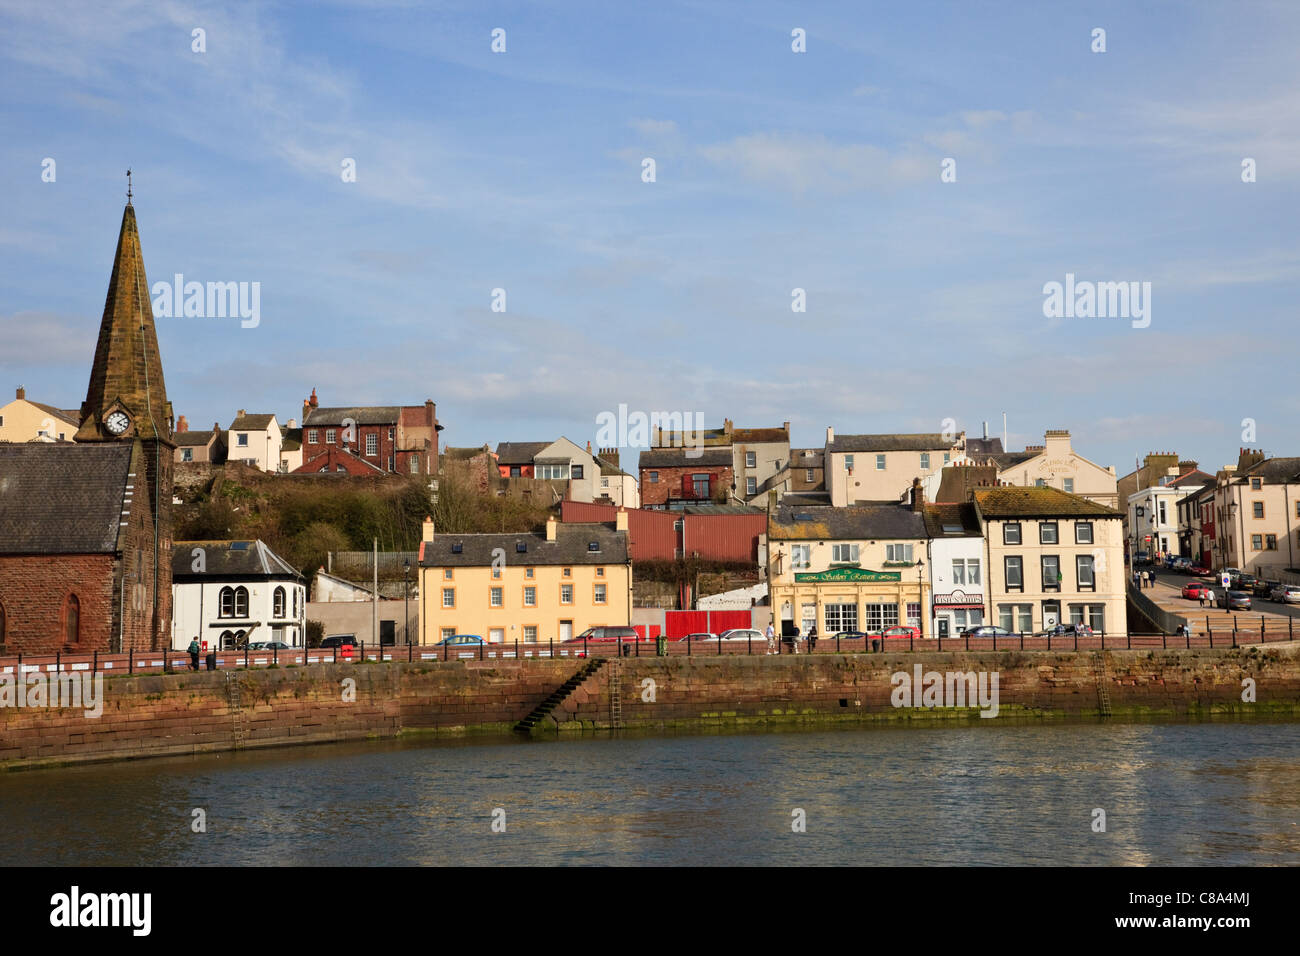 View across River Ellen harbour to the harbourside waterfront town buildings and Christ church. Maryport, Cumbria, England, UK, Britain Stock Photo